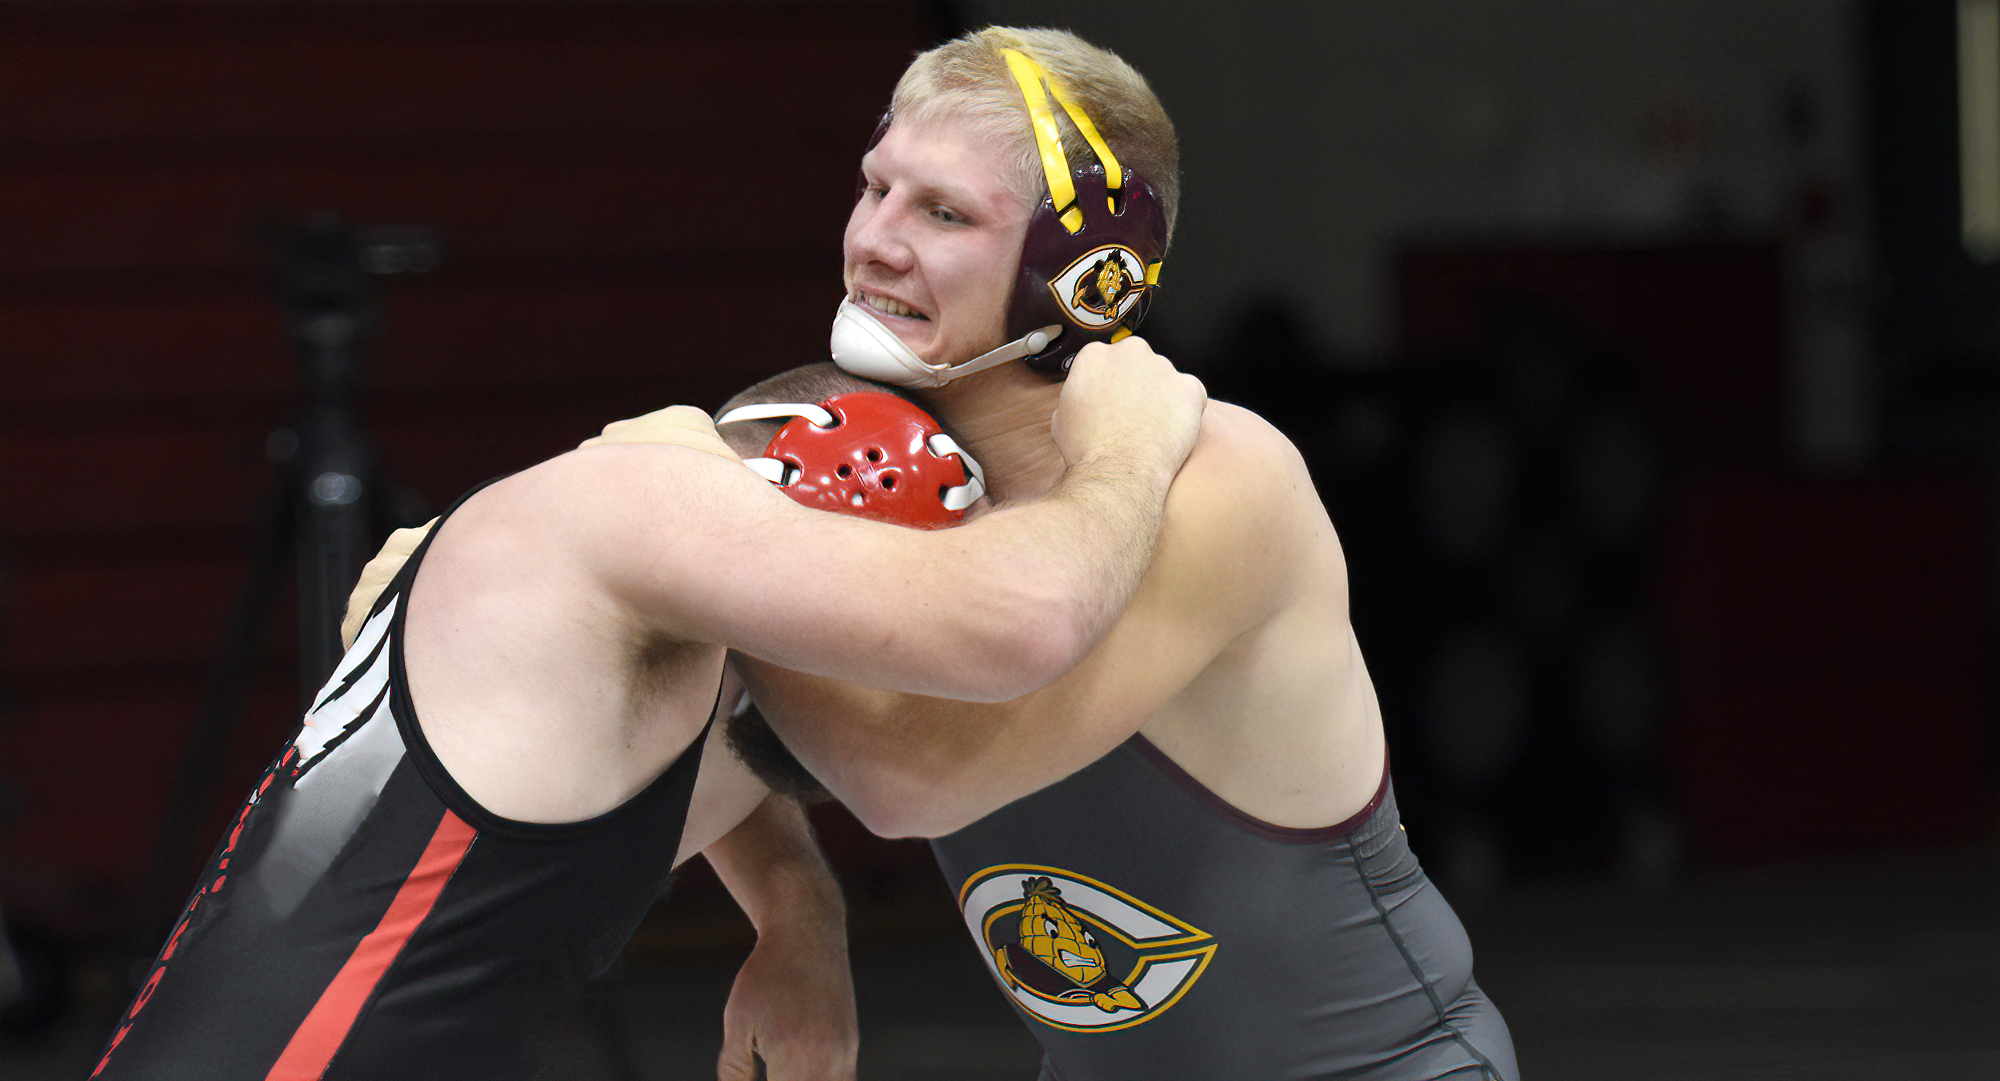 Gabe Zierden won both his matches at the Augsburg Invite to record his second straight 197-lb weight-class title this season.